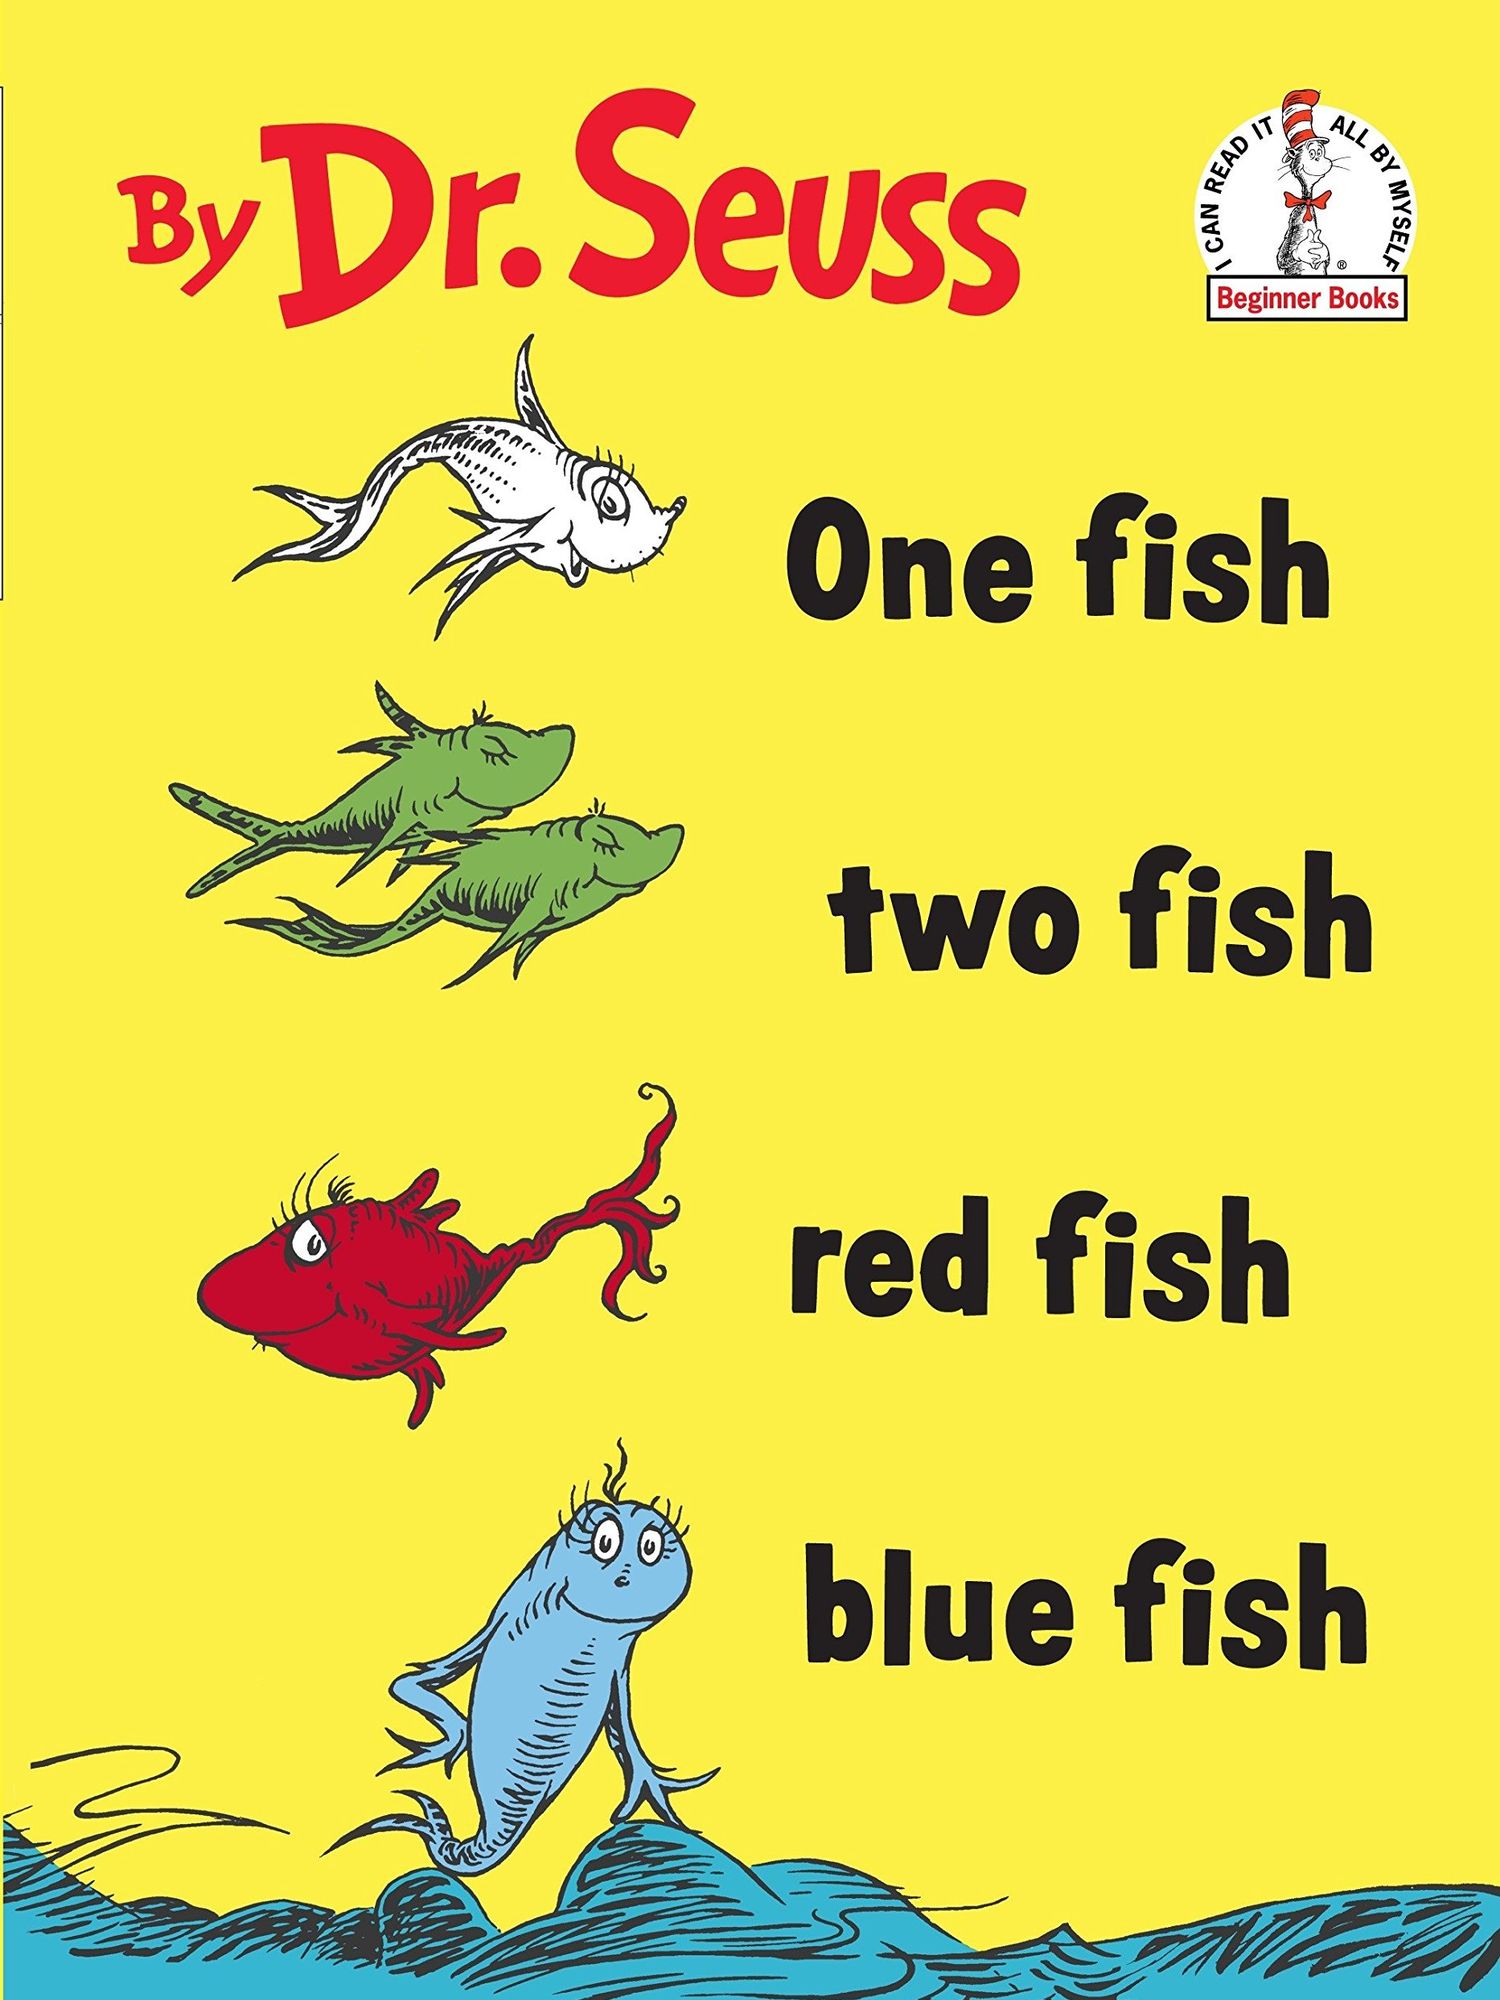 Dr. Seuss one fish two fish red fish blue fish